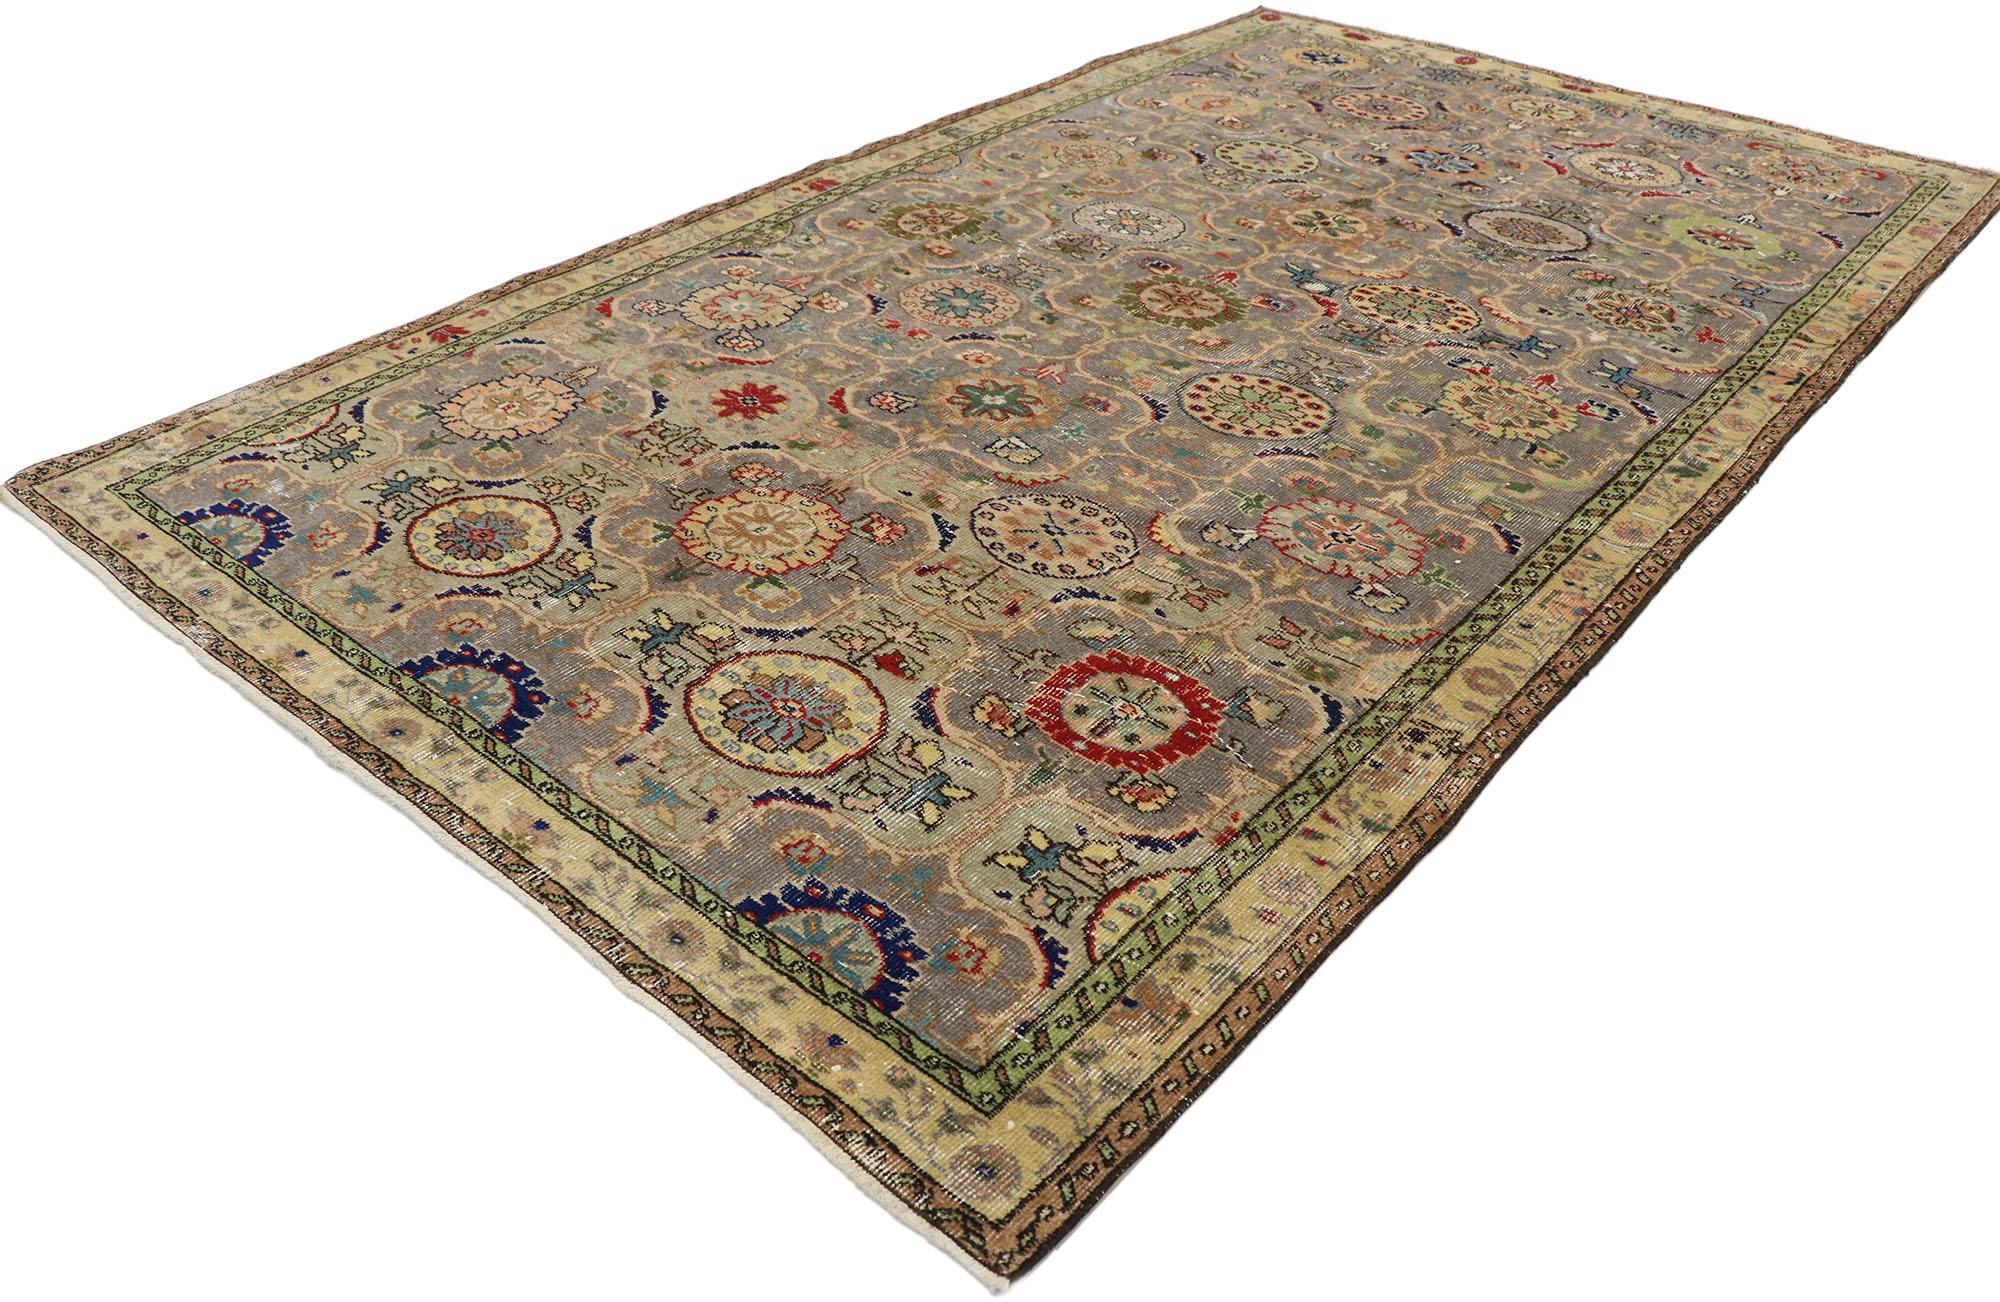 53230, distressed vintage Turkish Sivas rug with Rustic Craftsman style. Striking the perfect balance of rustic sensibility and understated elegance, this hand knotted wool vintage Turkish Sivas rug charms with ease. The lovingly time-worn field